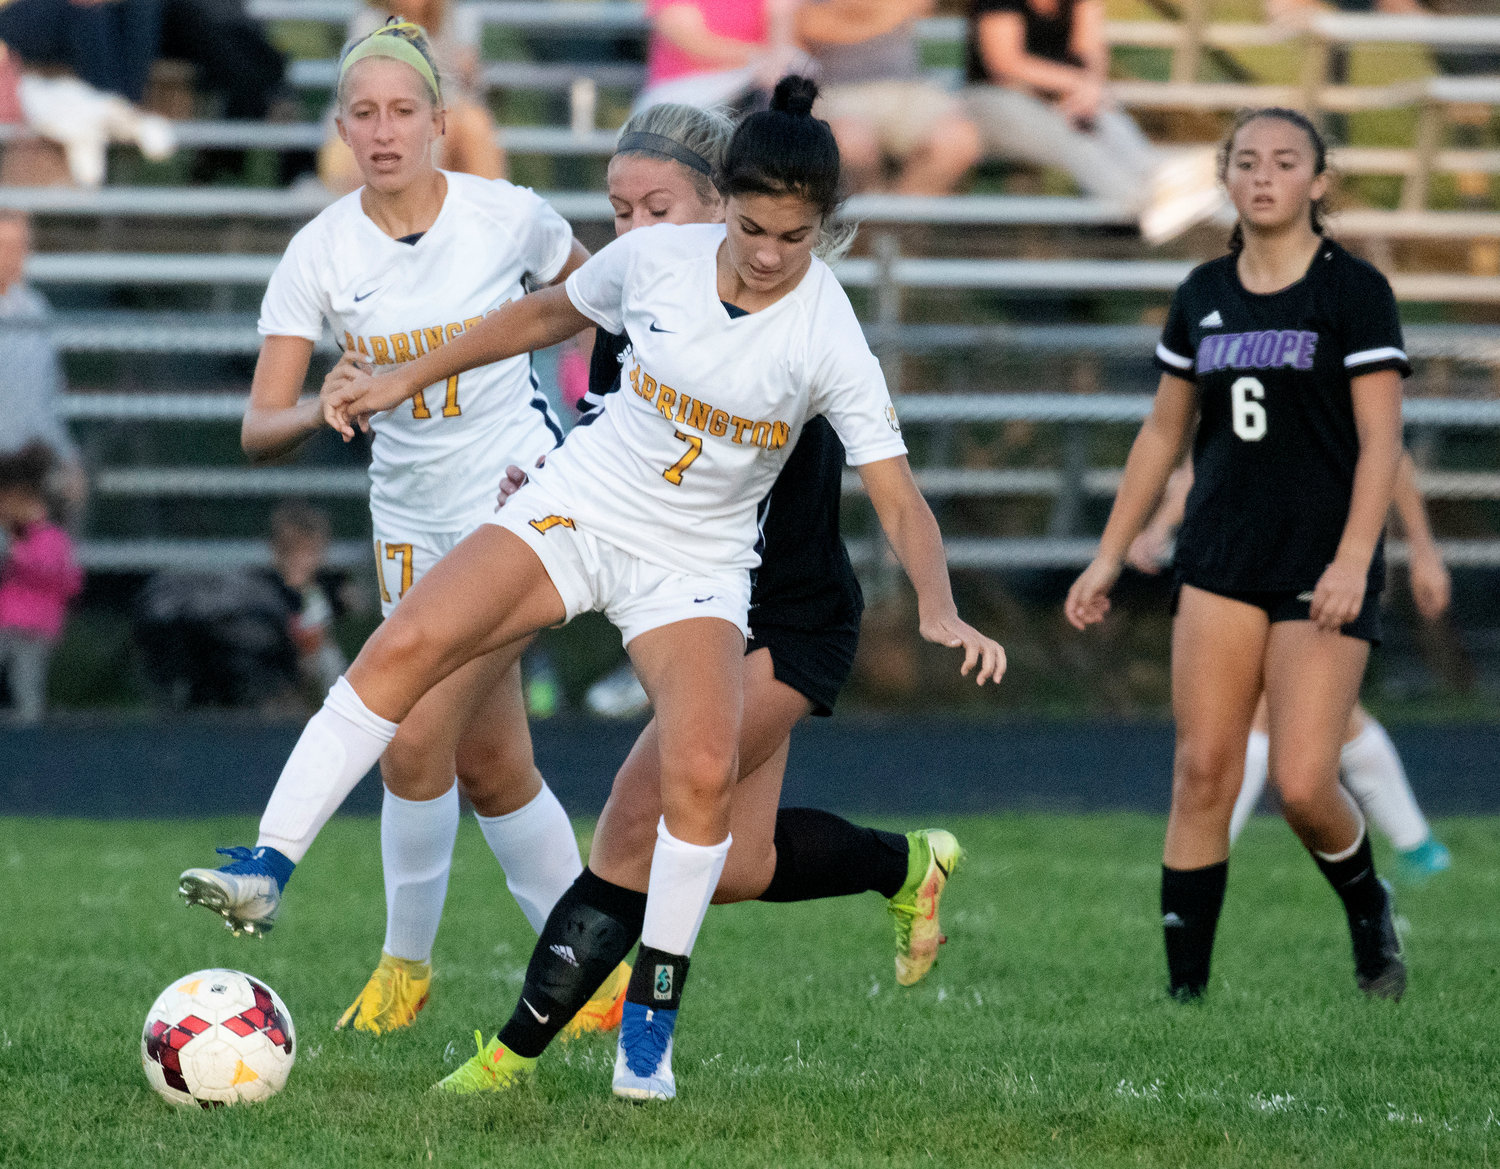 Lily Swintak (left) looks on as teammate Hannah Carlotto takes the ball away from a Huskies forward.